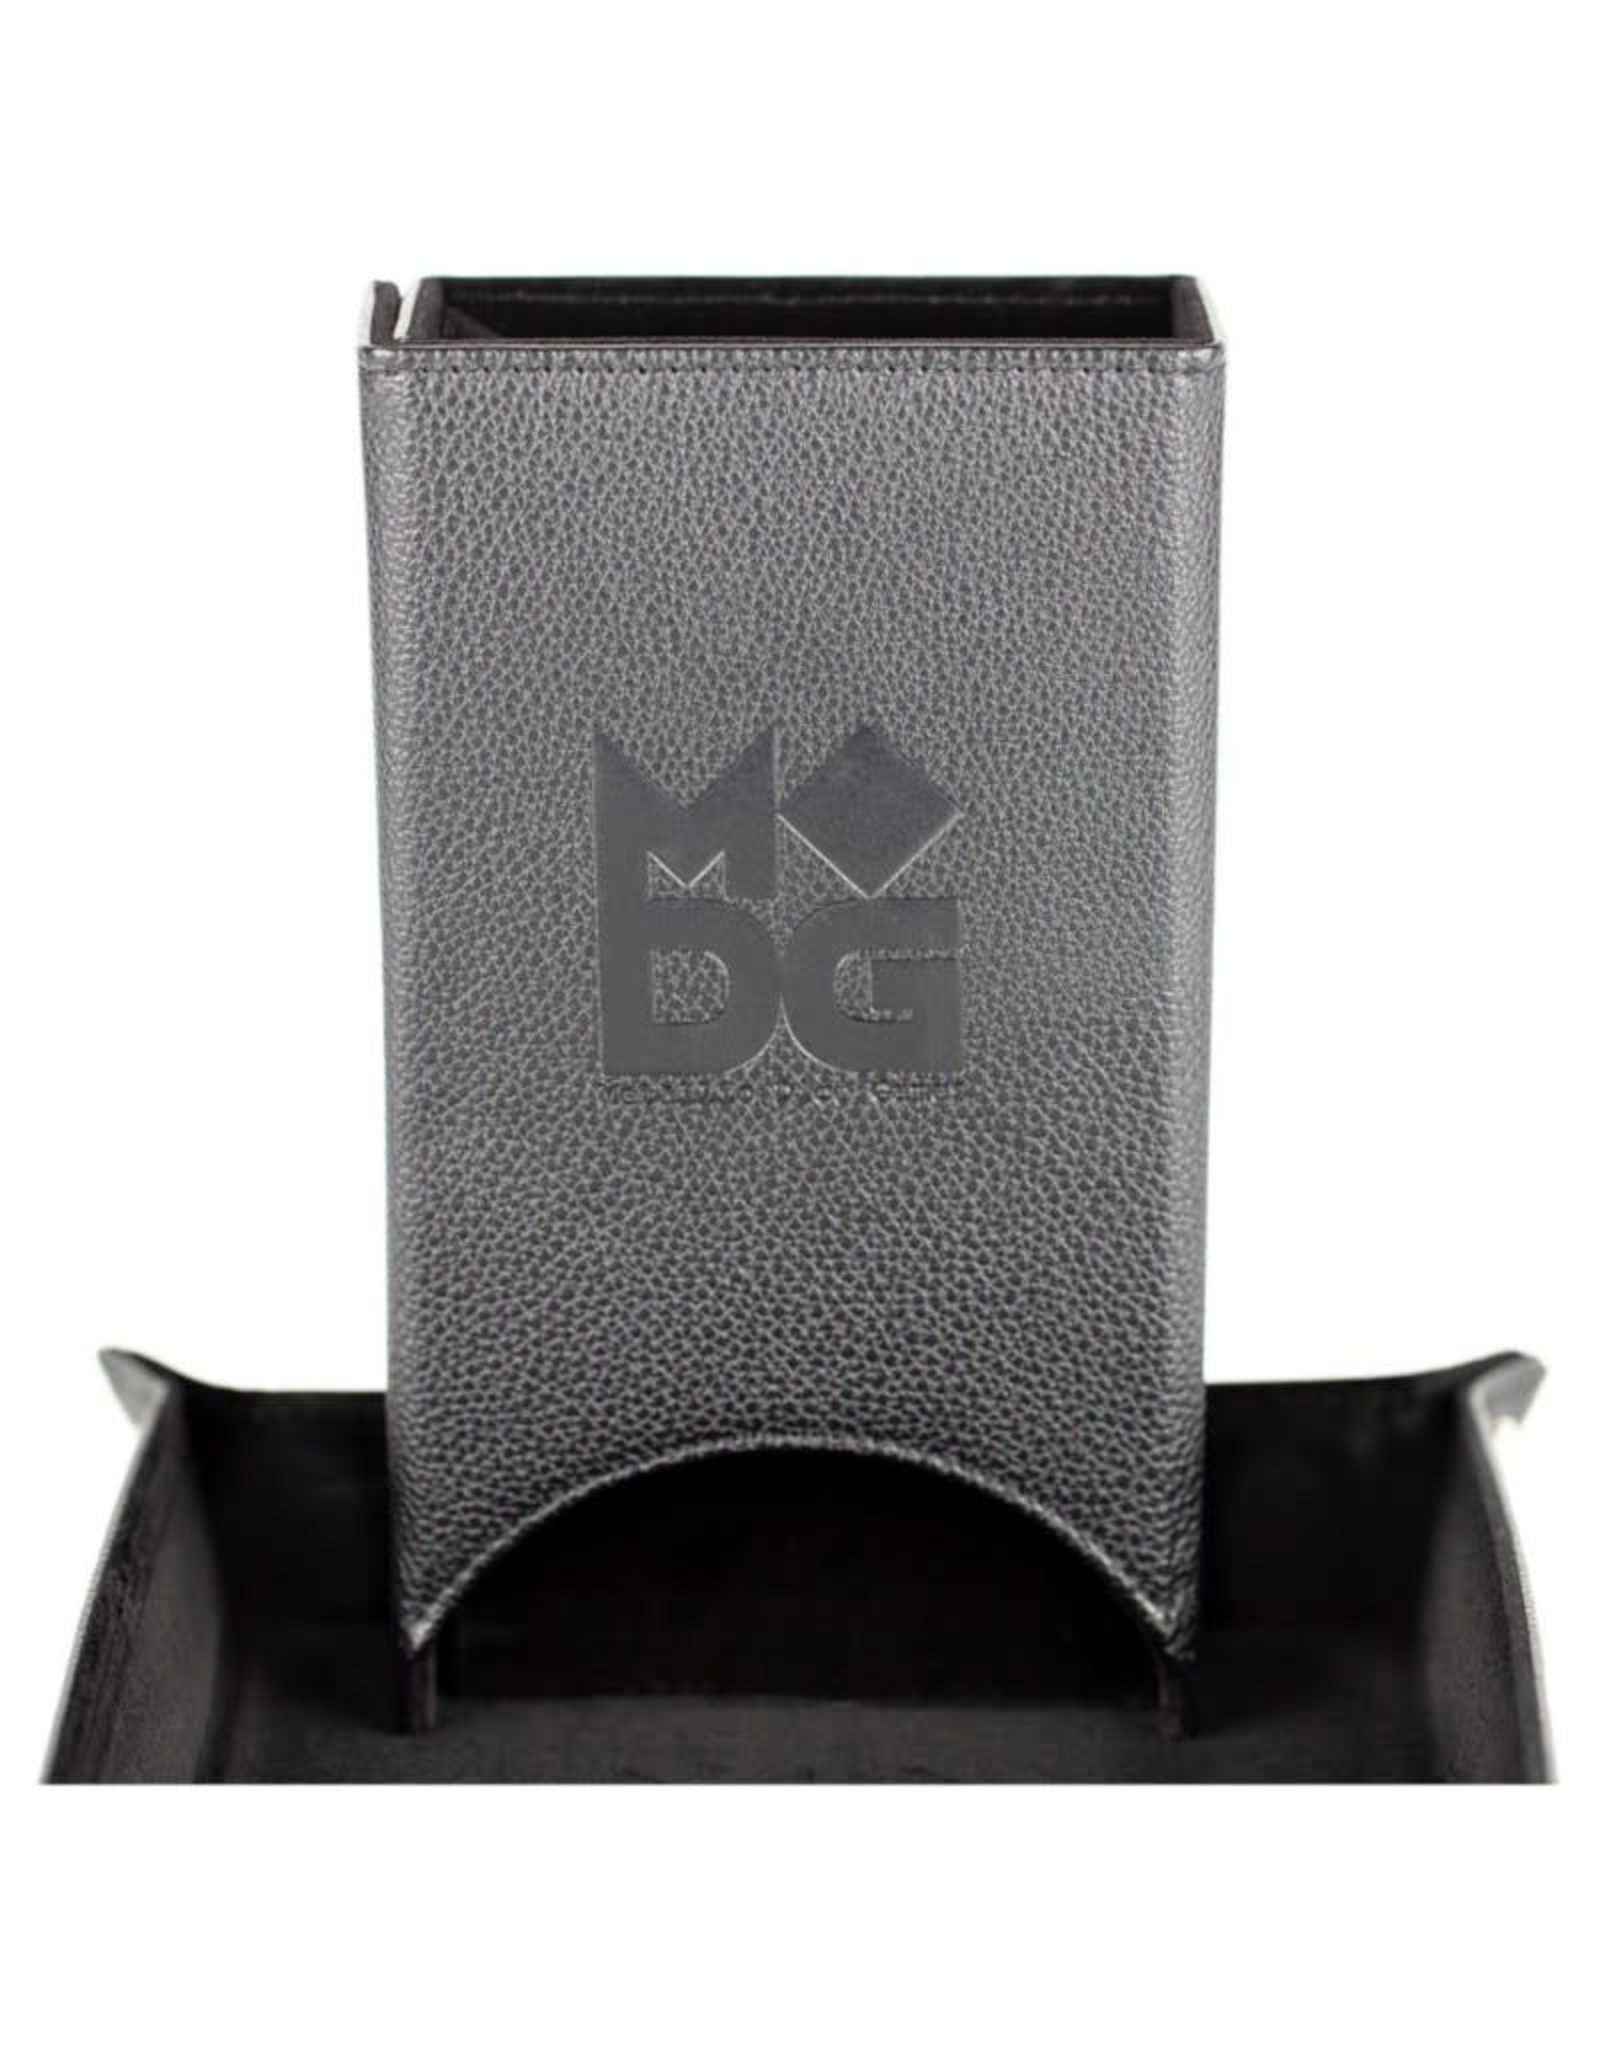 Metallic Dice Games Fold Up Leather Dice Tower: Black